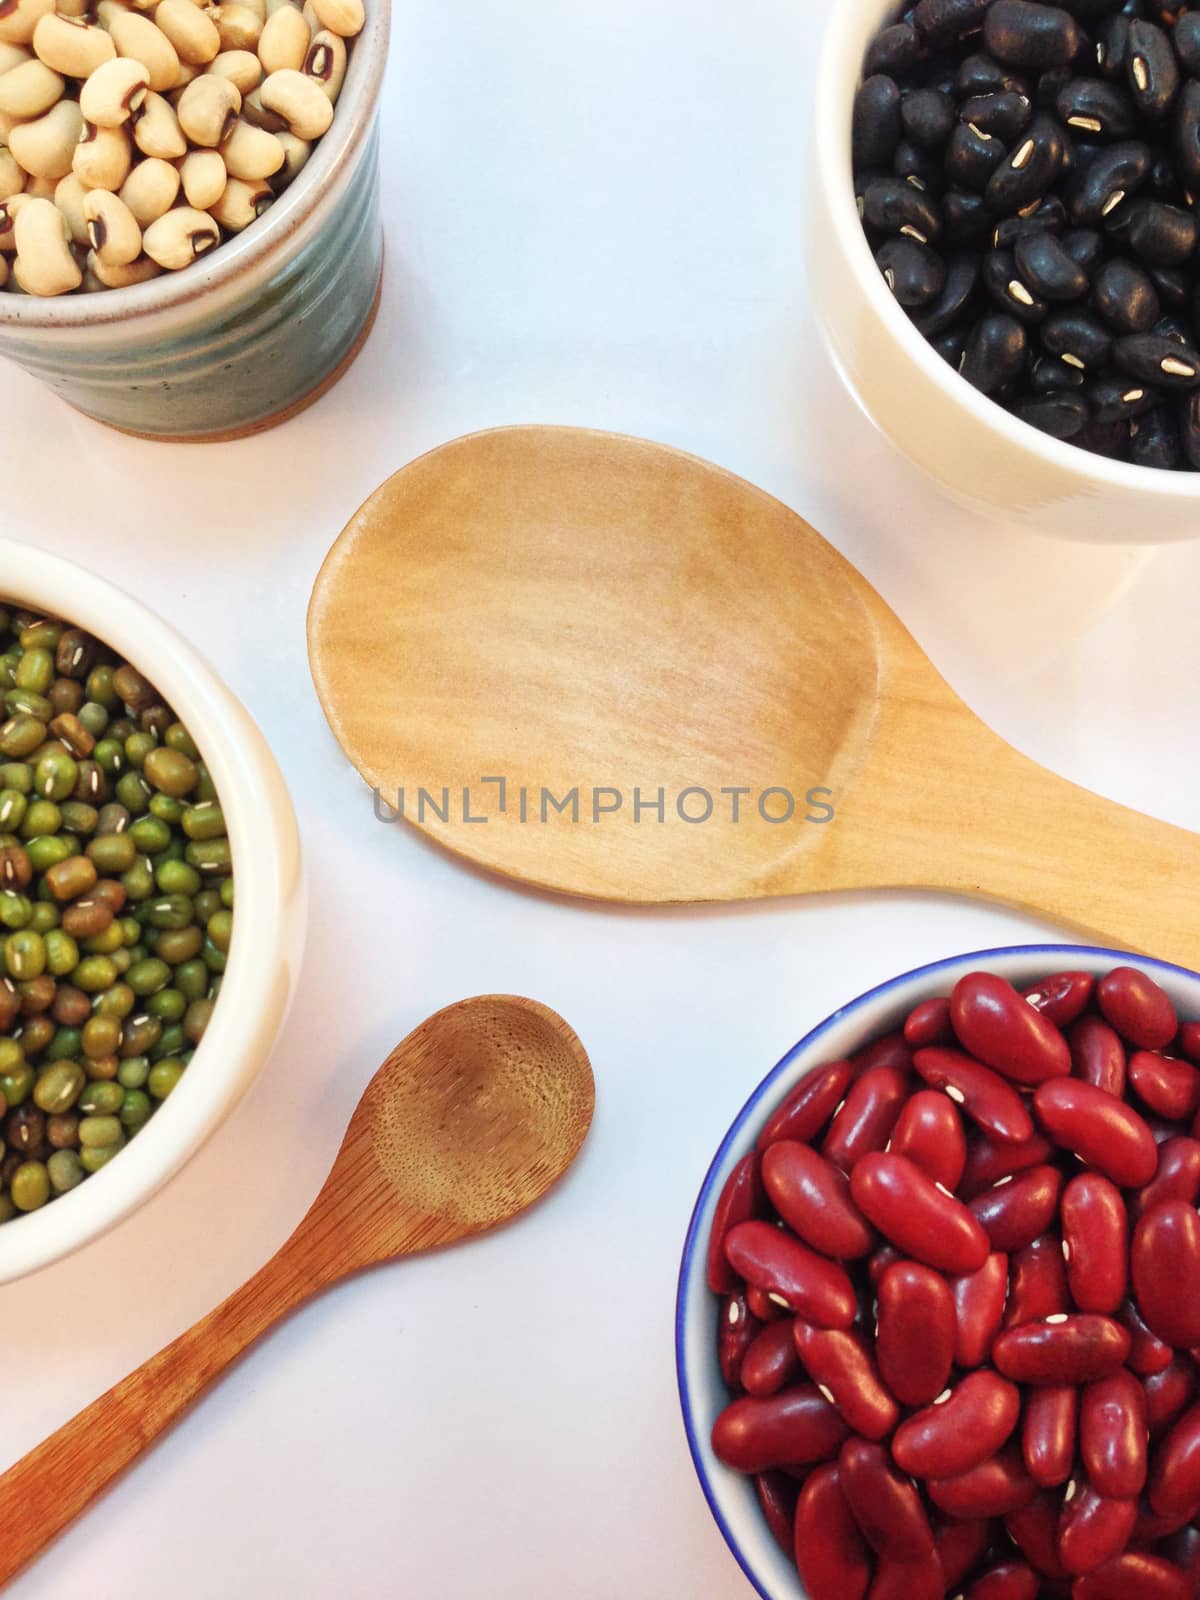 Black eye peas, mung beans, black beans and red kidney beans in  by Bowonpat